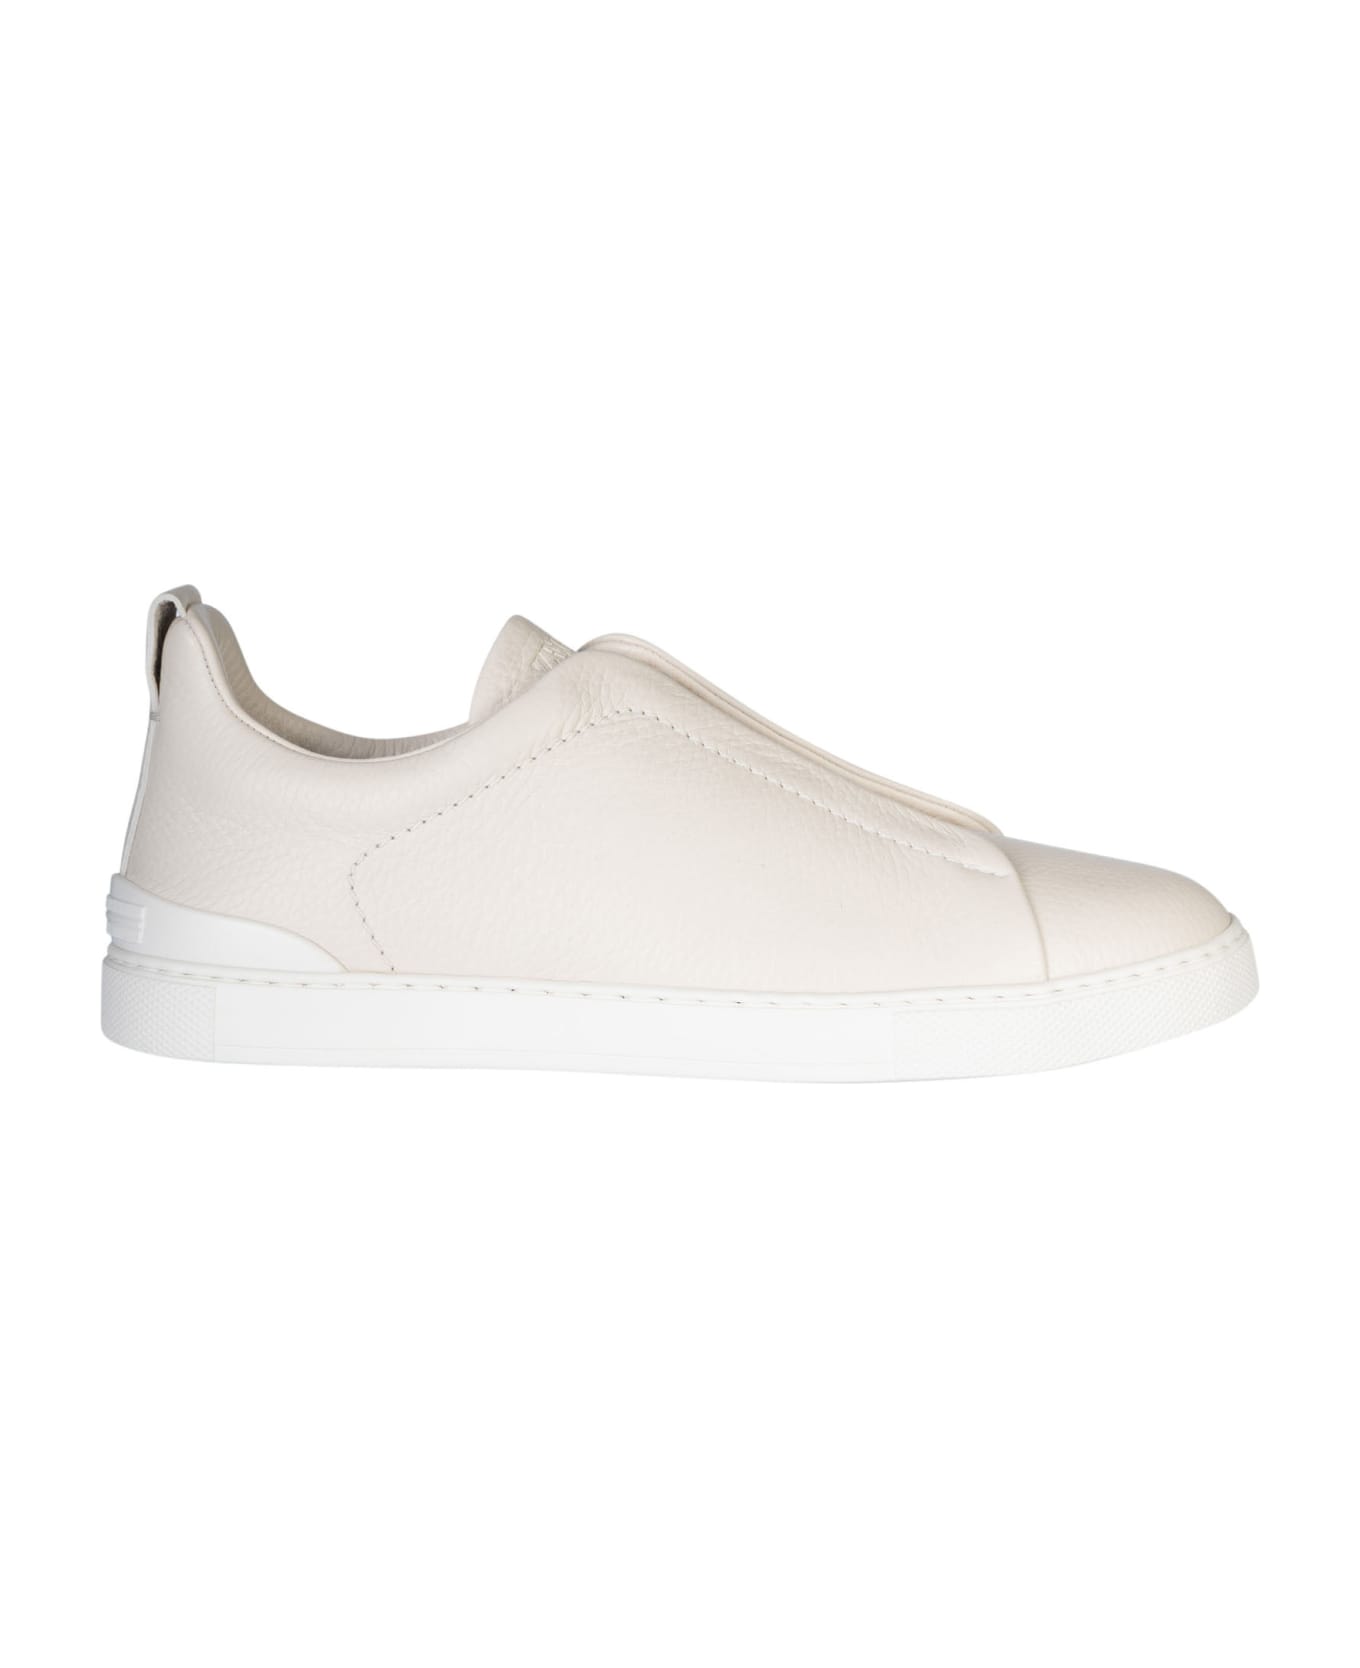 Zegna Fitted Slide-on Sneakers